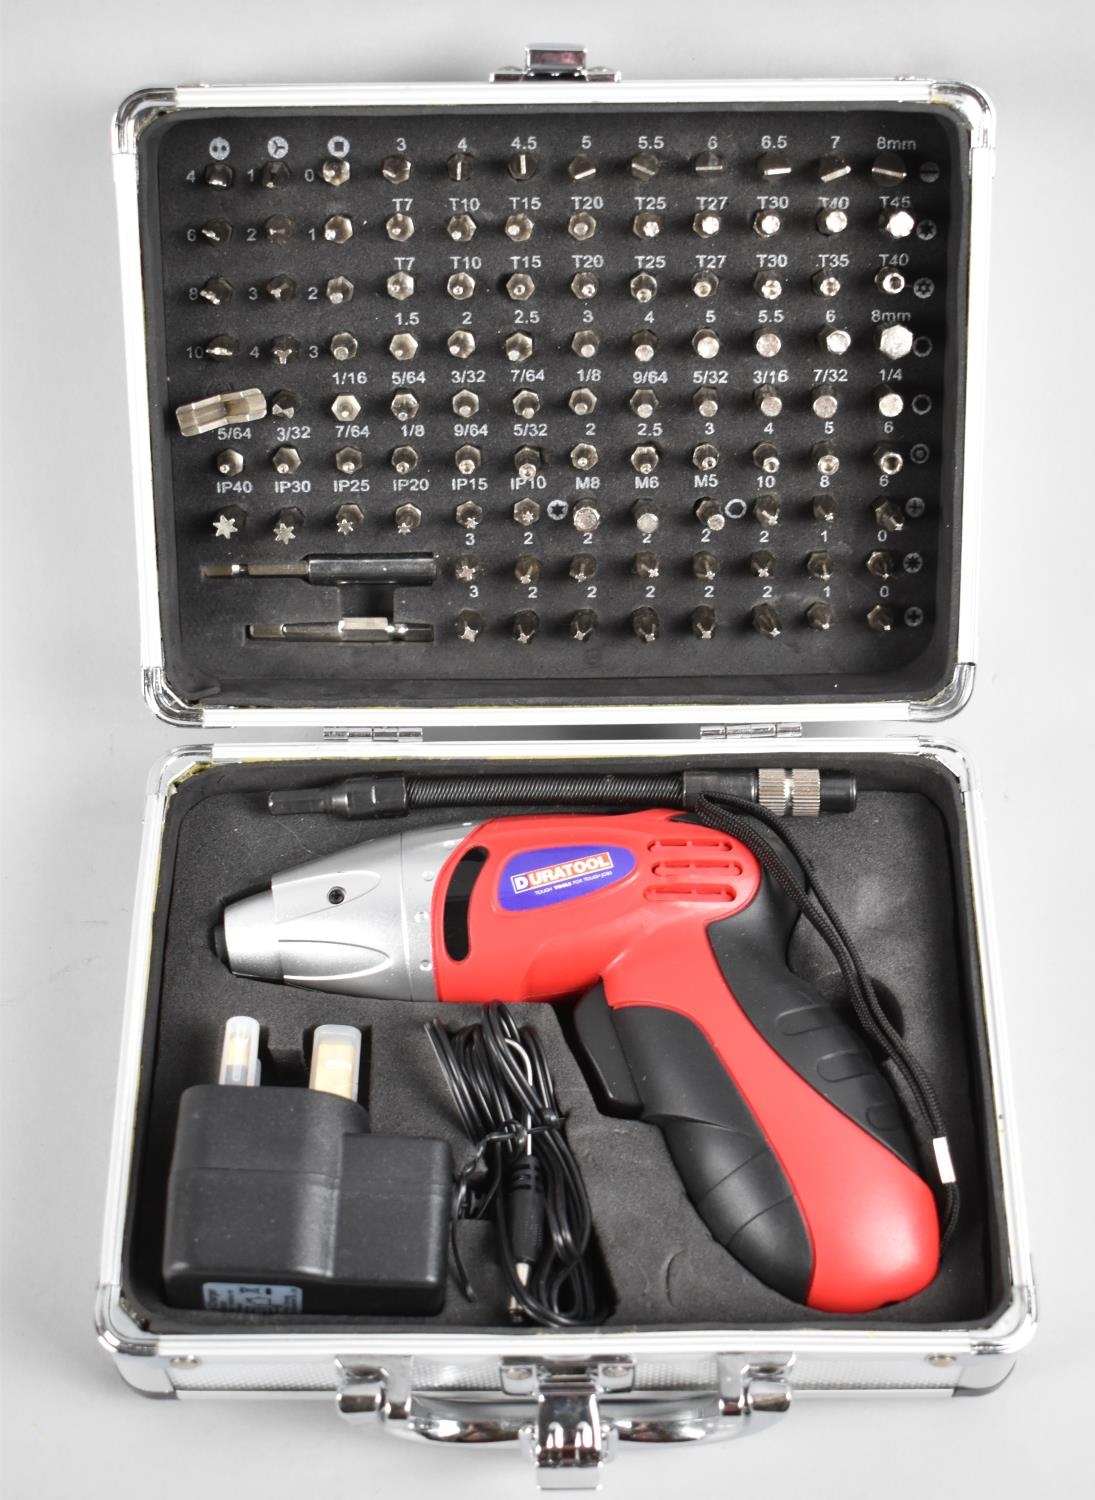 A Modern Duratool Electric Screwdriver with Interchangeable Heads together with a Cased Set of Drill - Image 2 of 2